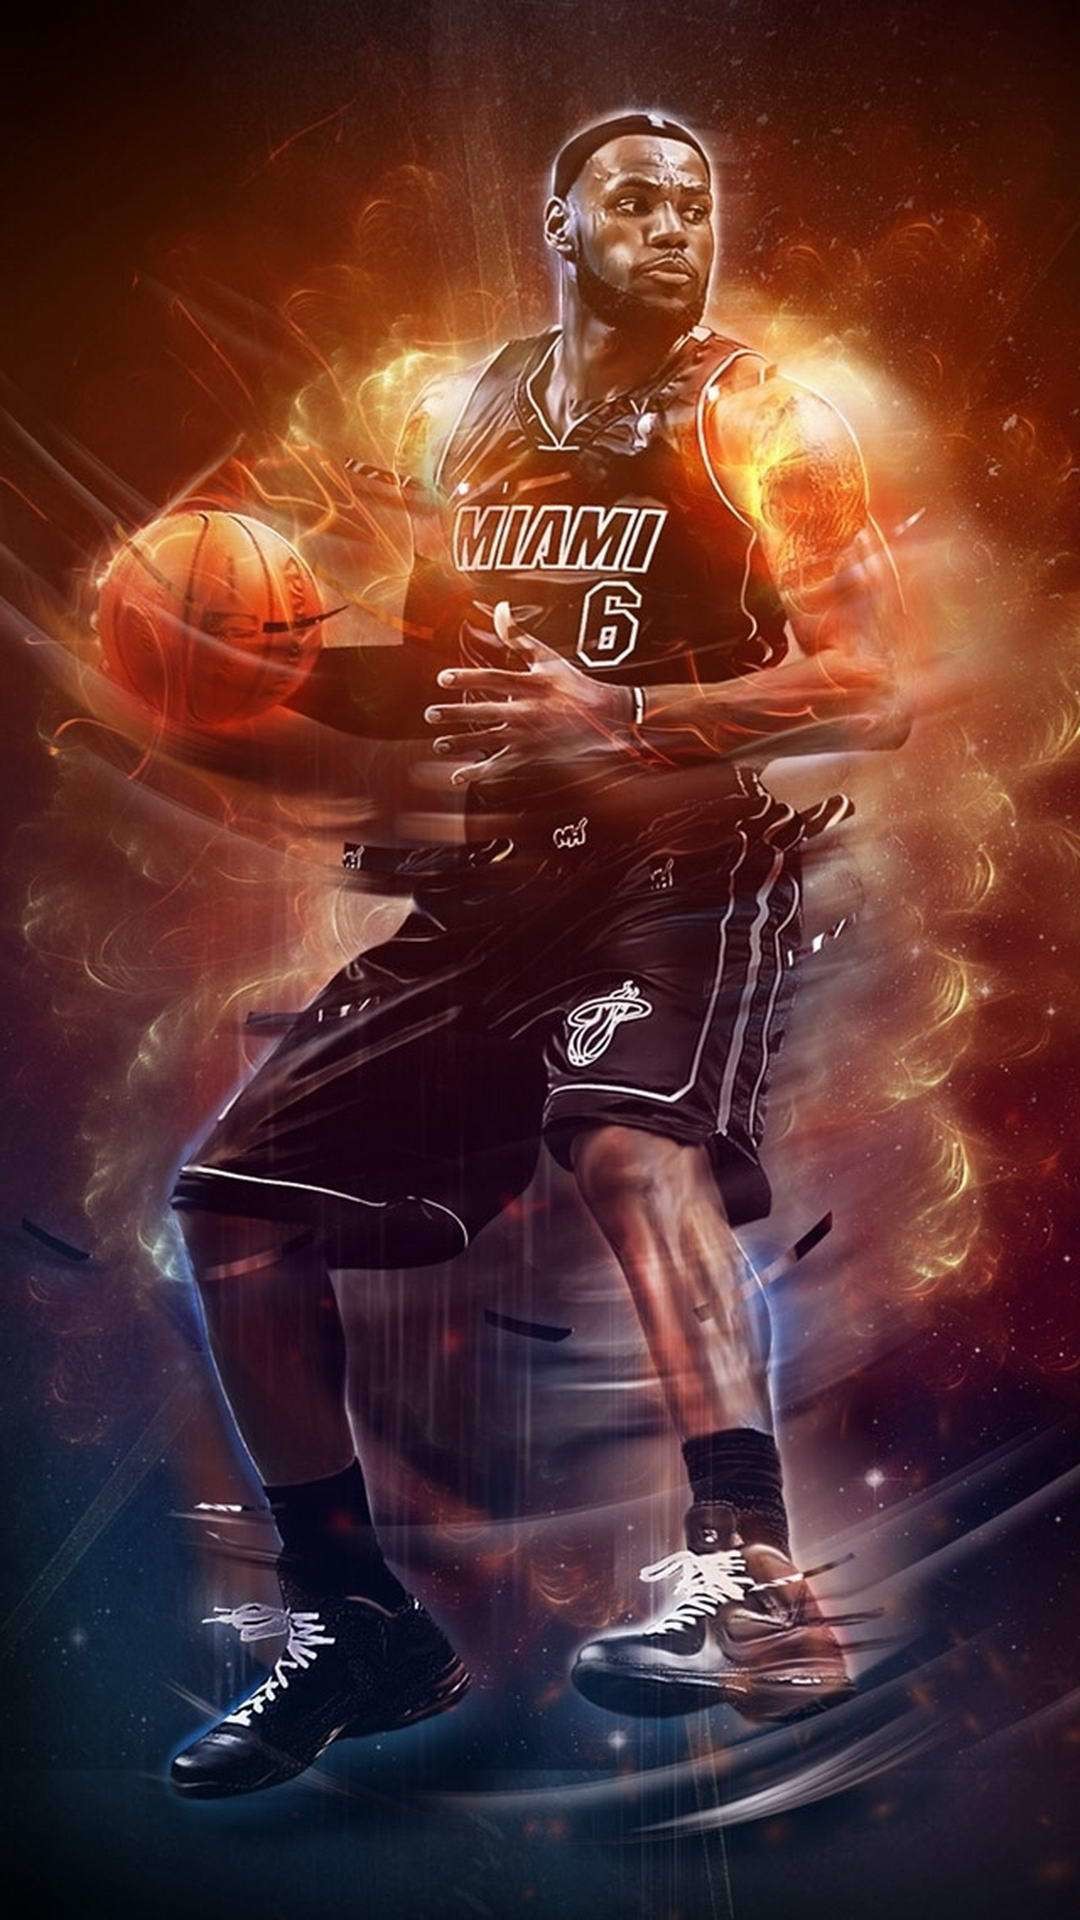 1080x1920 lebron james wallpaper for cell phone